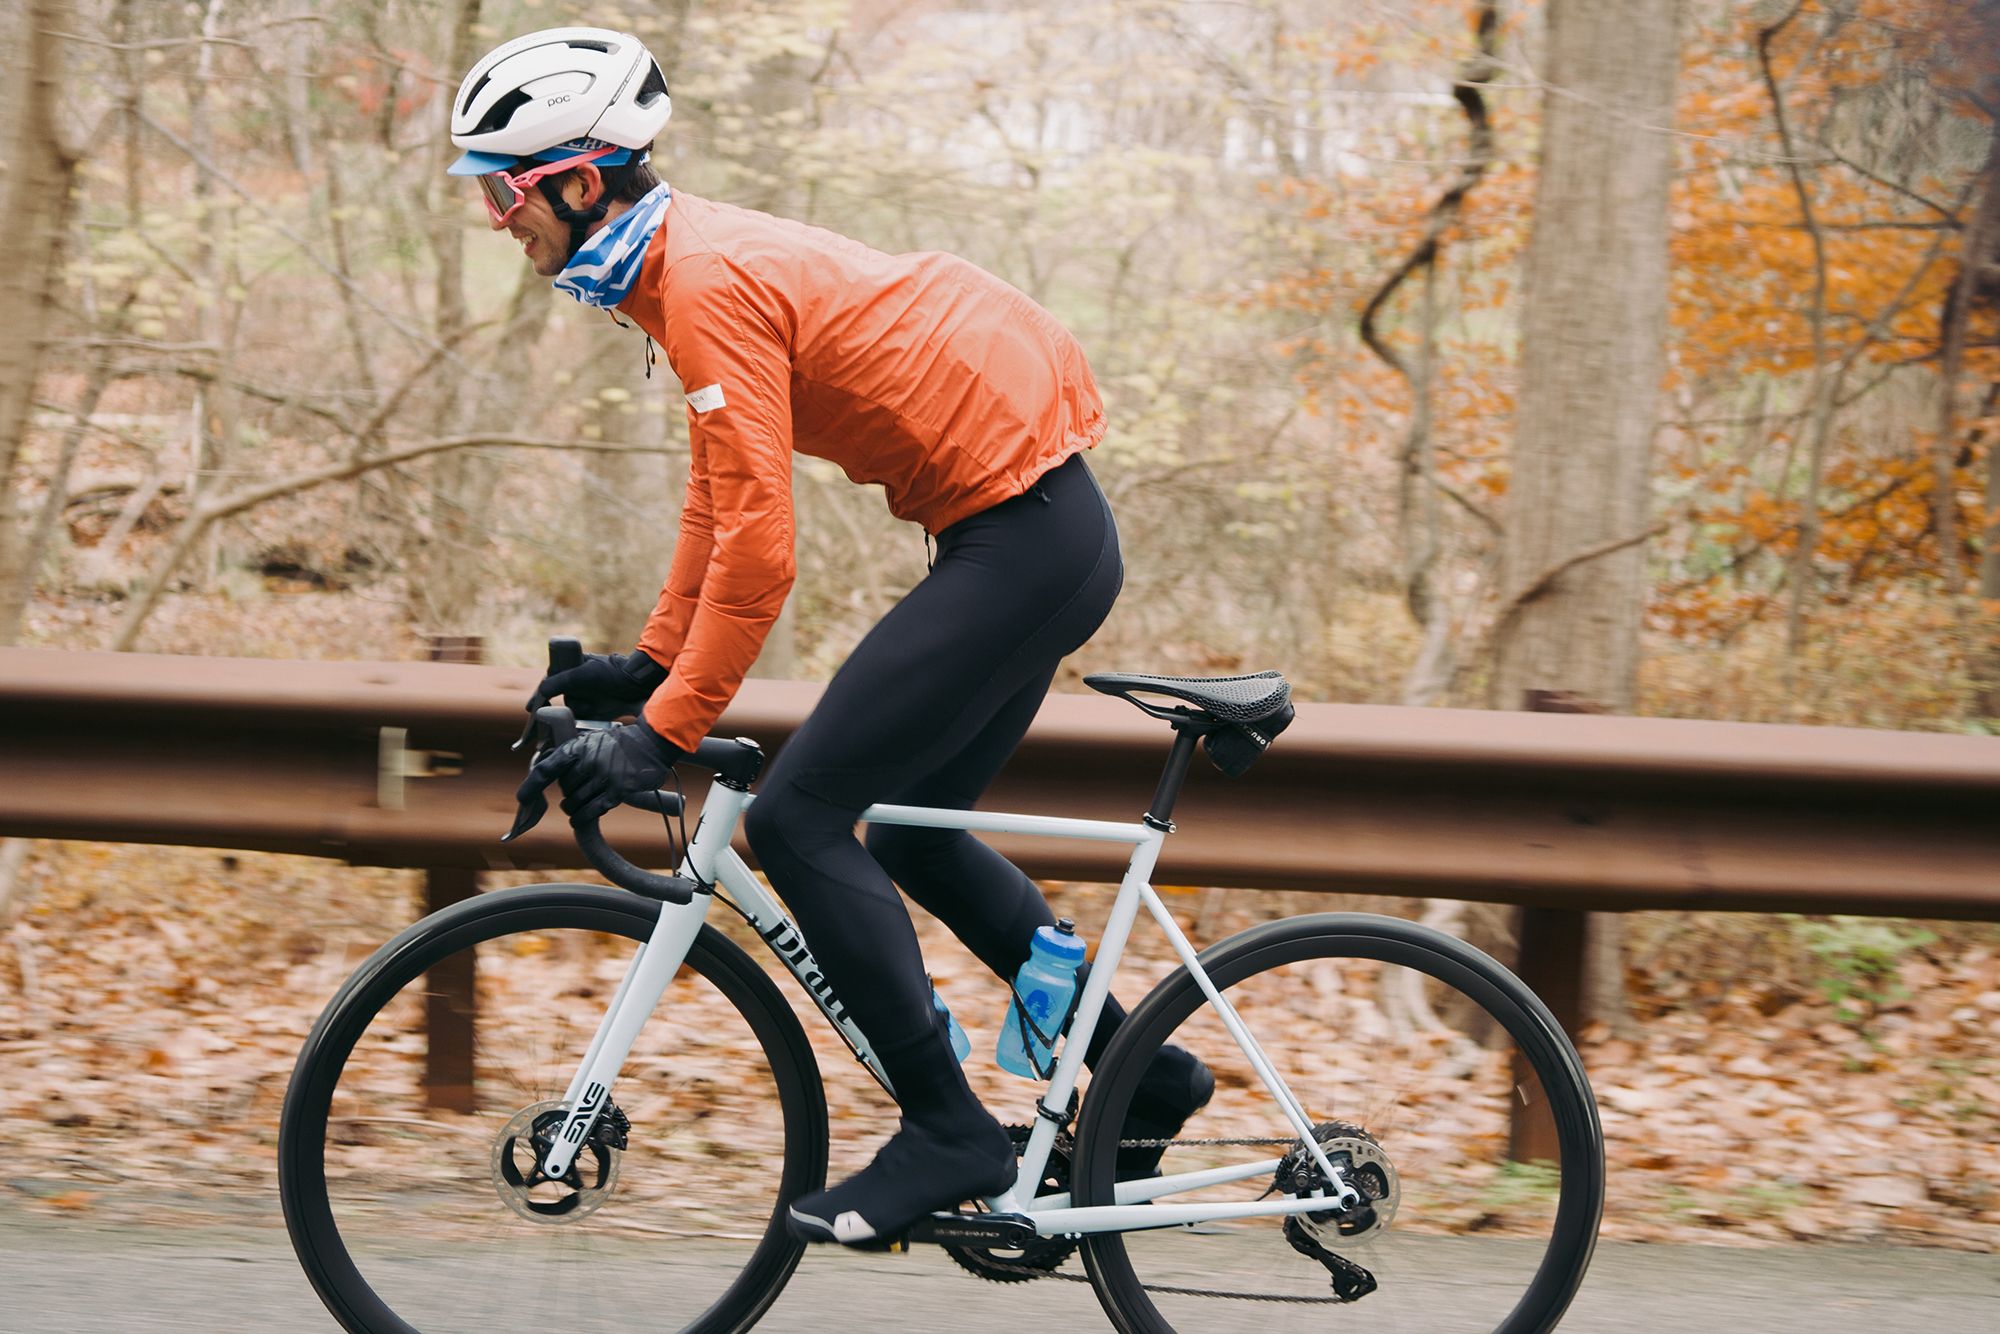 Best cycling jerseys 2021: Top long-sleeve bike shirts for winter rides